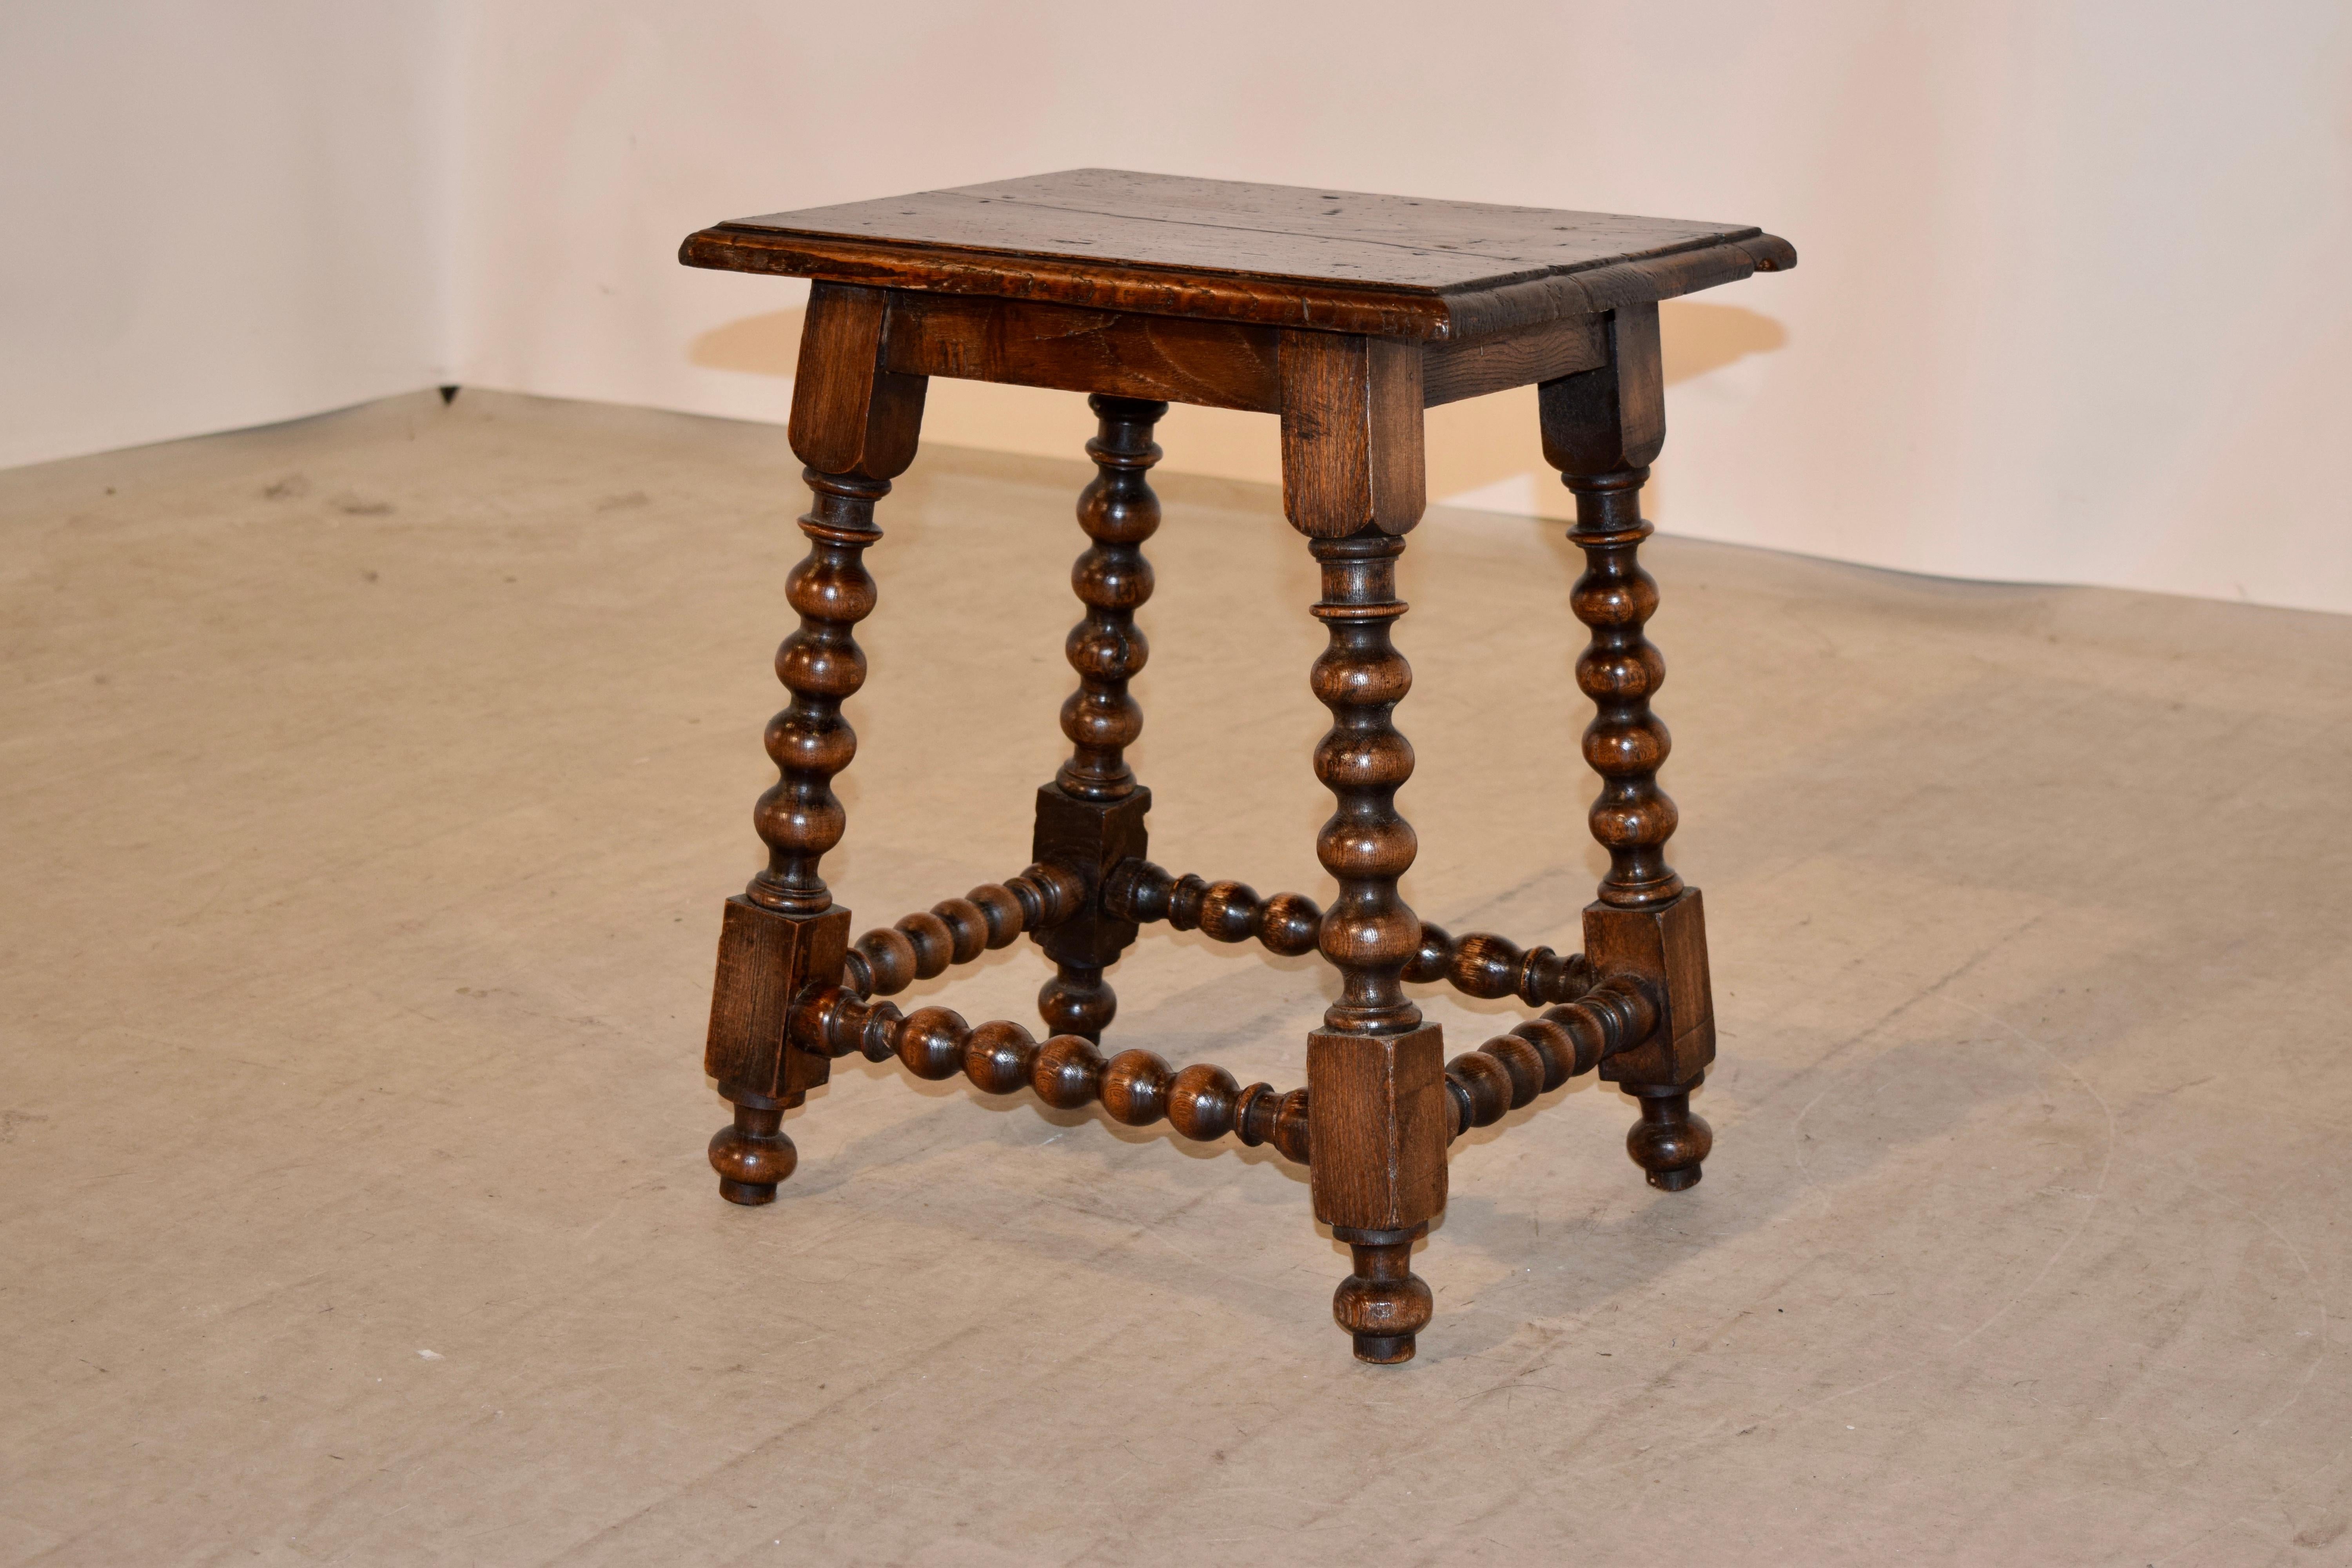 19th century oak stool from England with a beveled edge around the top following down to a simple apron and splayed legs which are hand-turned and are connected by matching stretchers. Raised on hand-turned feet.